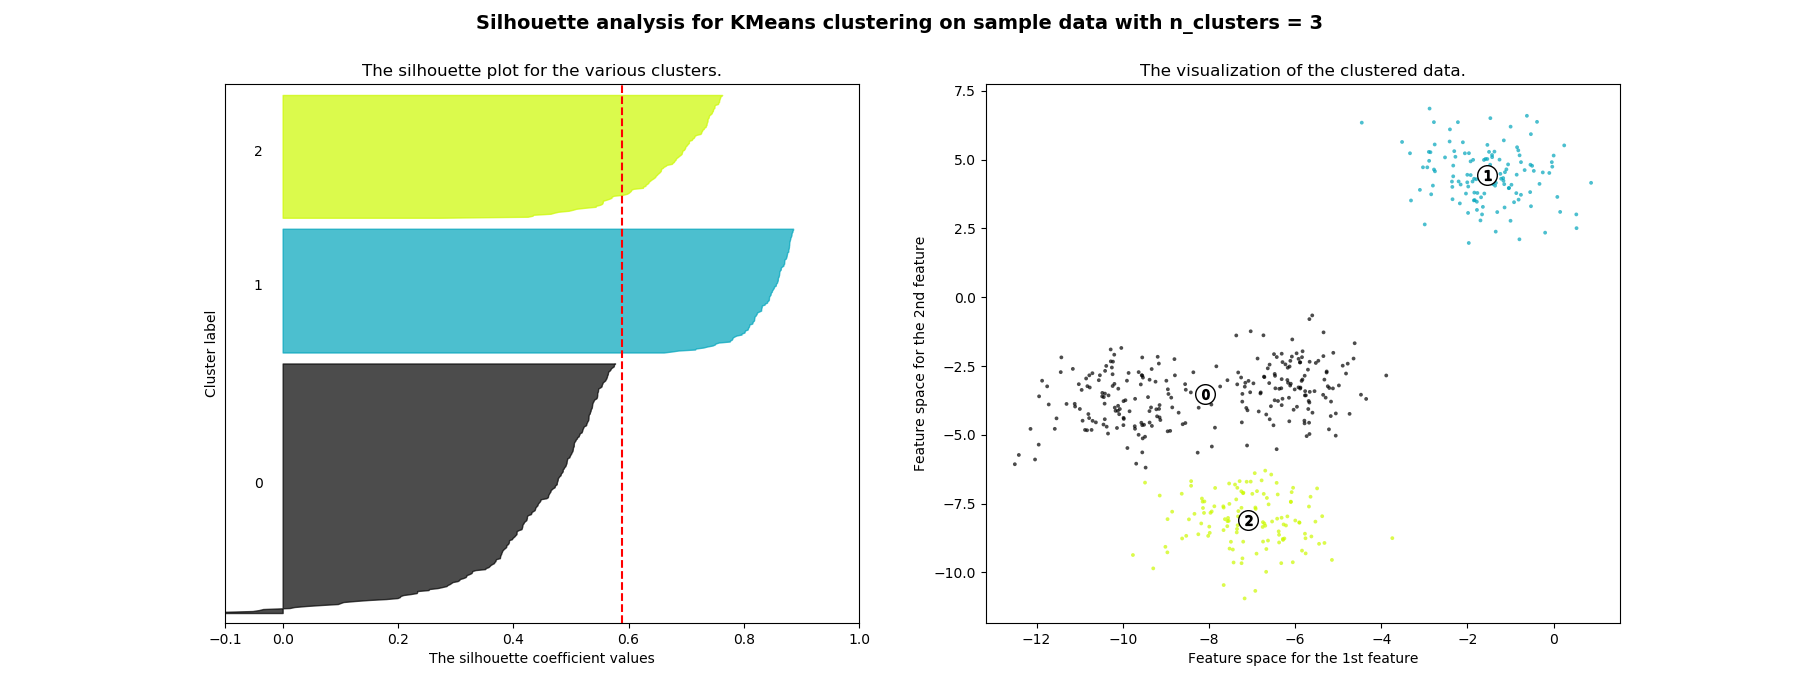 ../../_images/sphx_glr_plot_kmeans_silhouette_analysis_002.png